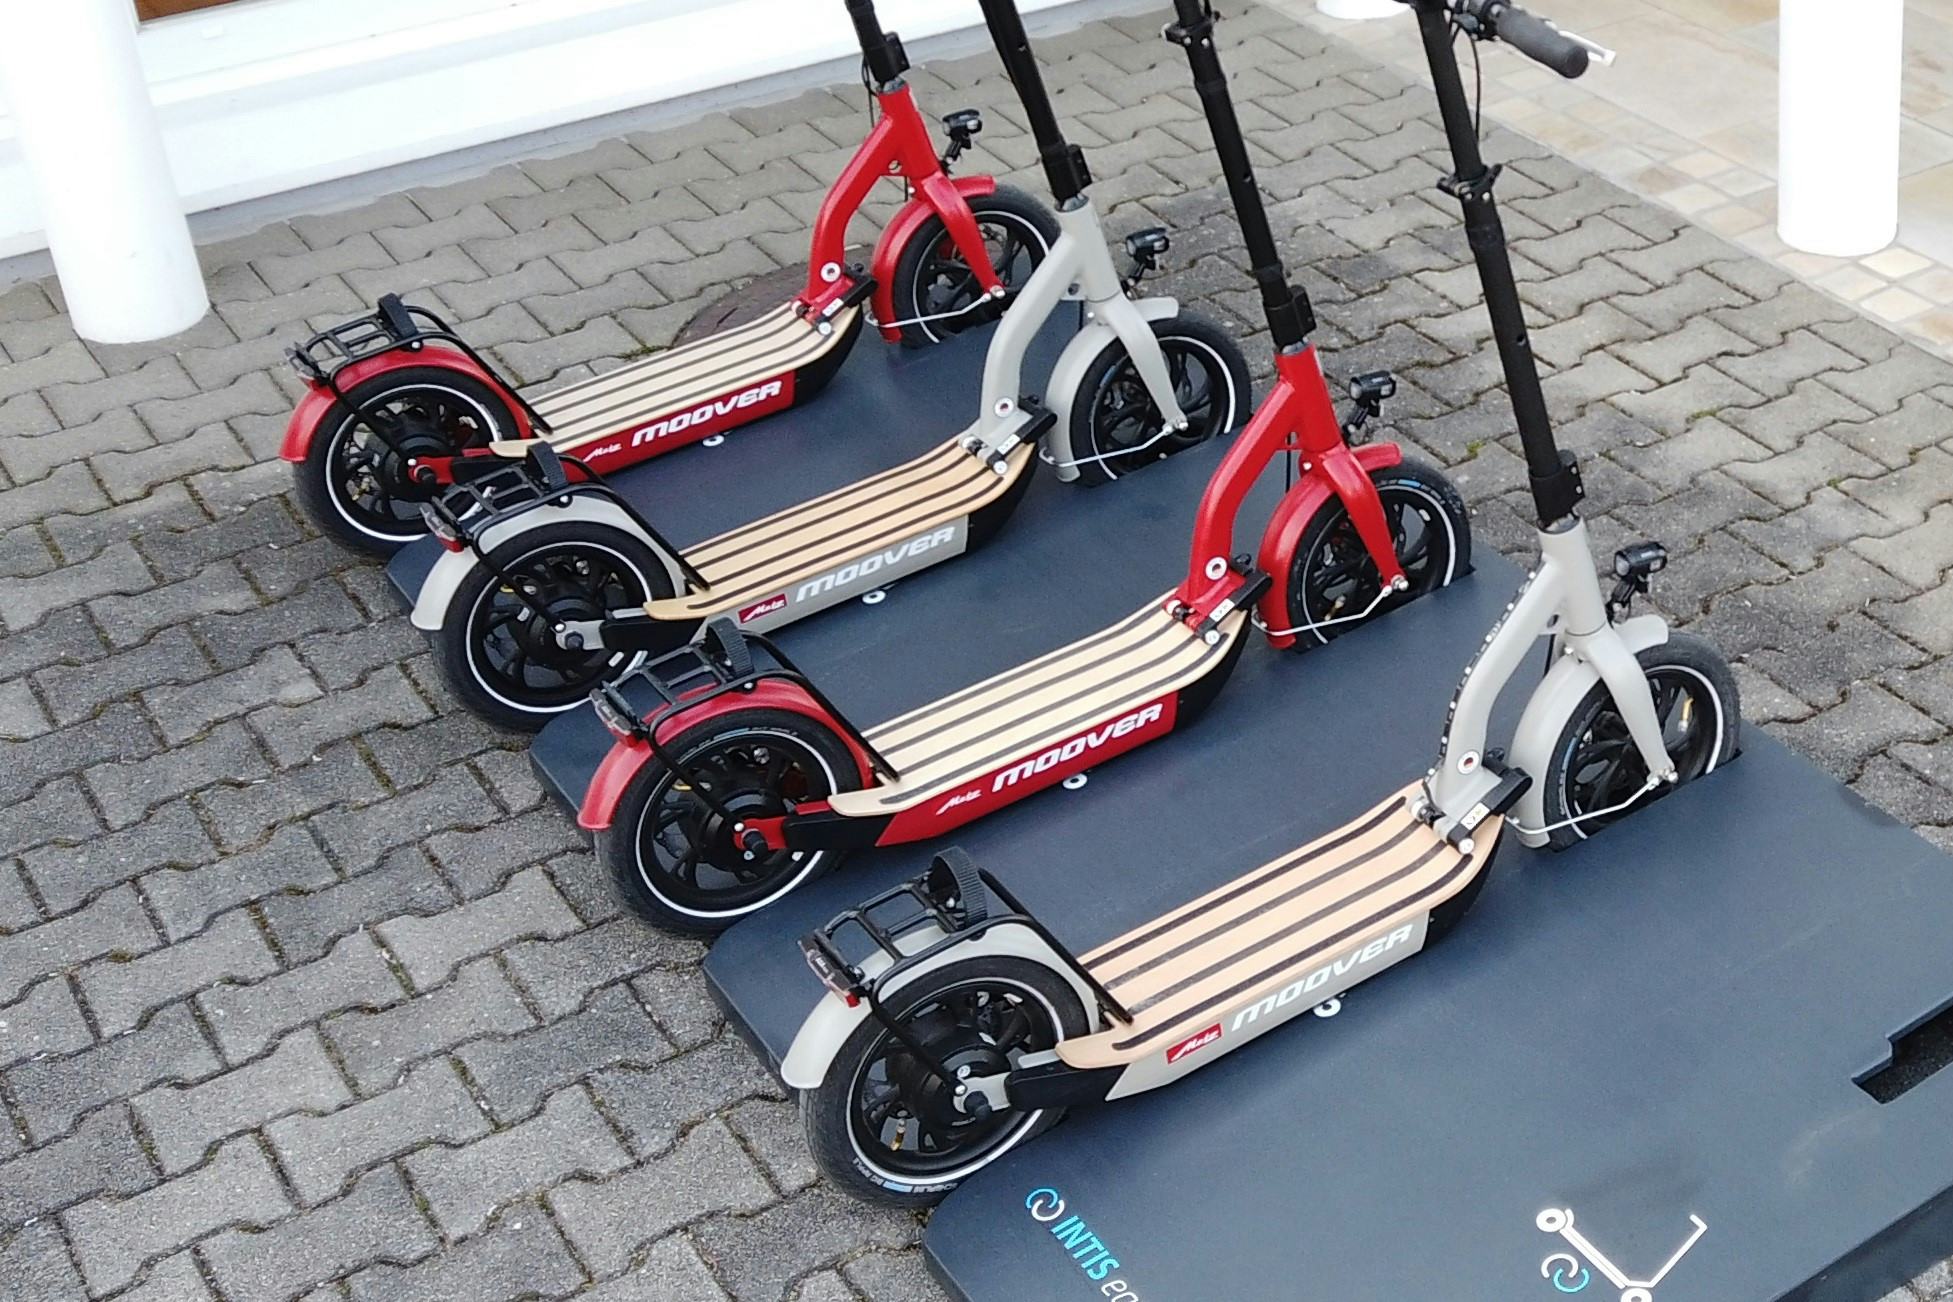 Inductive charging now also enables new business models, for example for fleet applications, e-bike sharing and cargo e-bikes. – Photo Metz Mecatech 